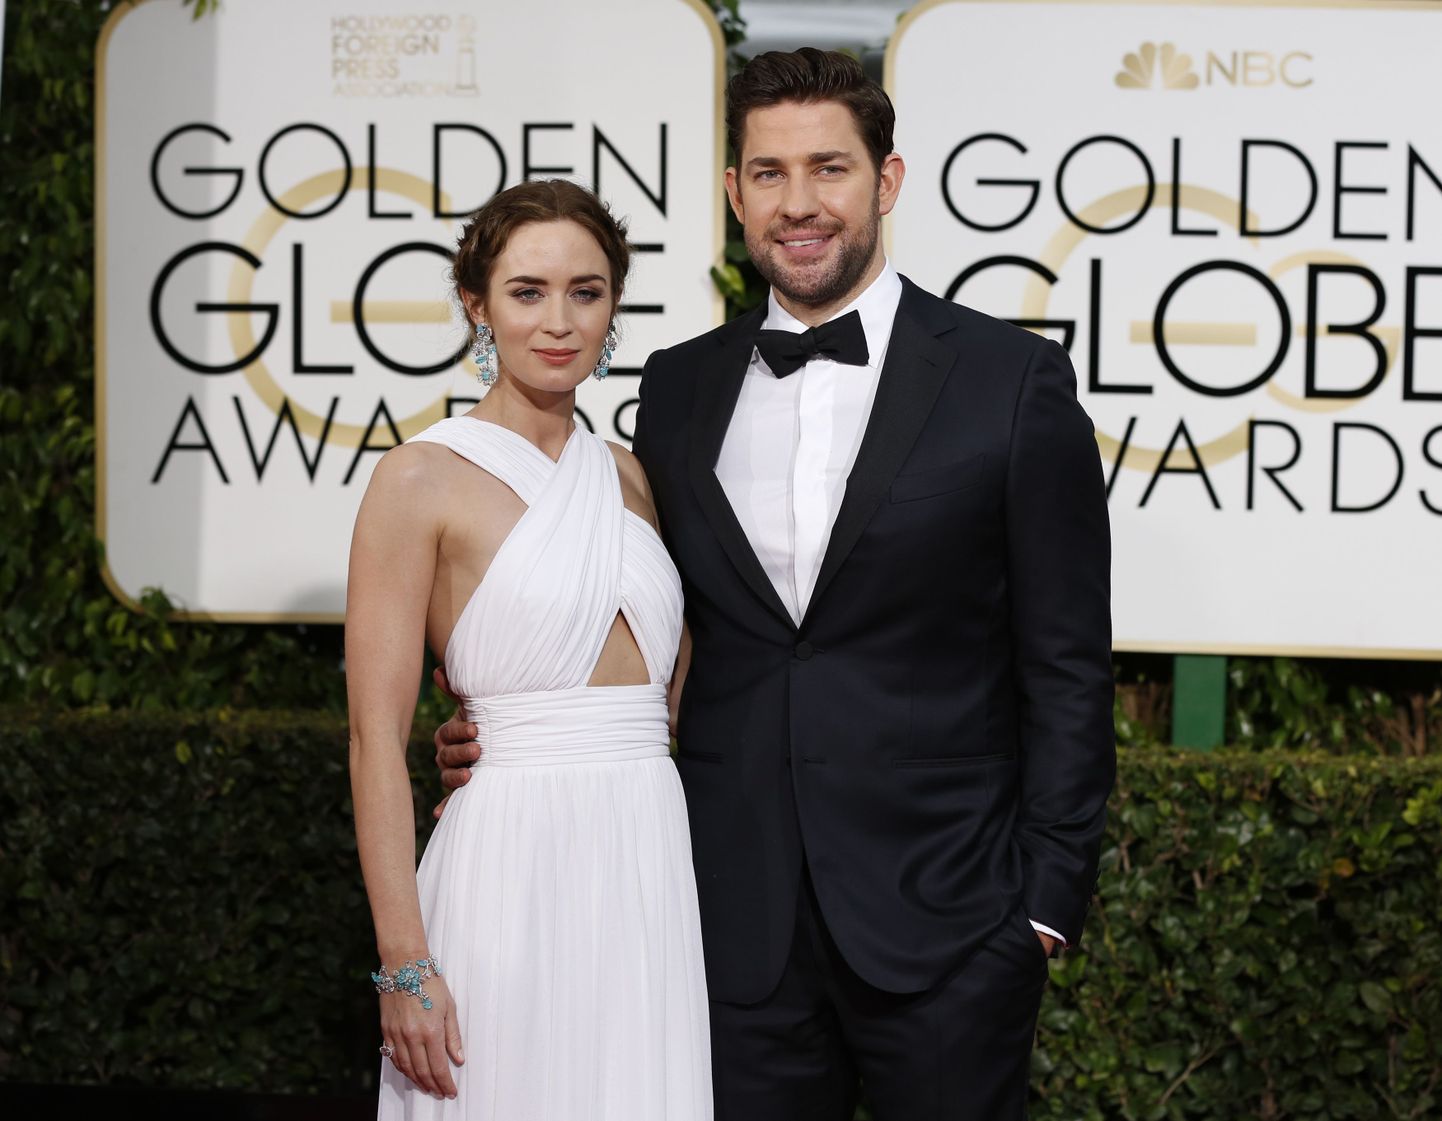 Actress Emily Blunt (L) arrives with actor John Krasinski at the 72nd Golden Globe Awards in Beverly Hills, California January 11, 2015.  REUTERS/Mario Anzuoni  (UNITED STATES - Tags: ENTERTAINMENT)(GOLDENGLOBES-ARRIVALS)